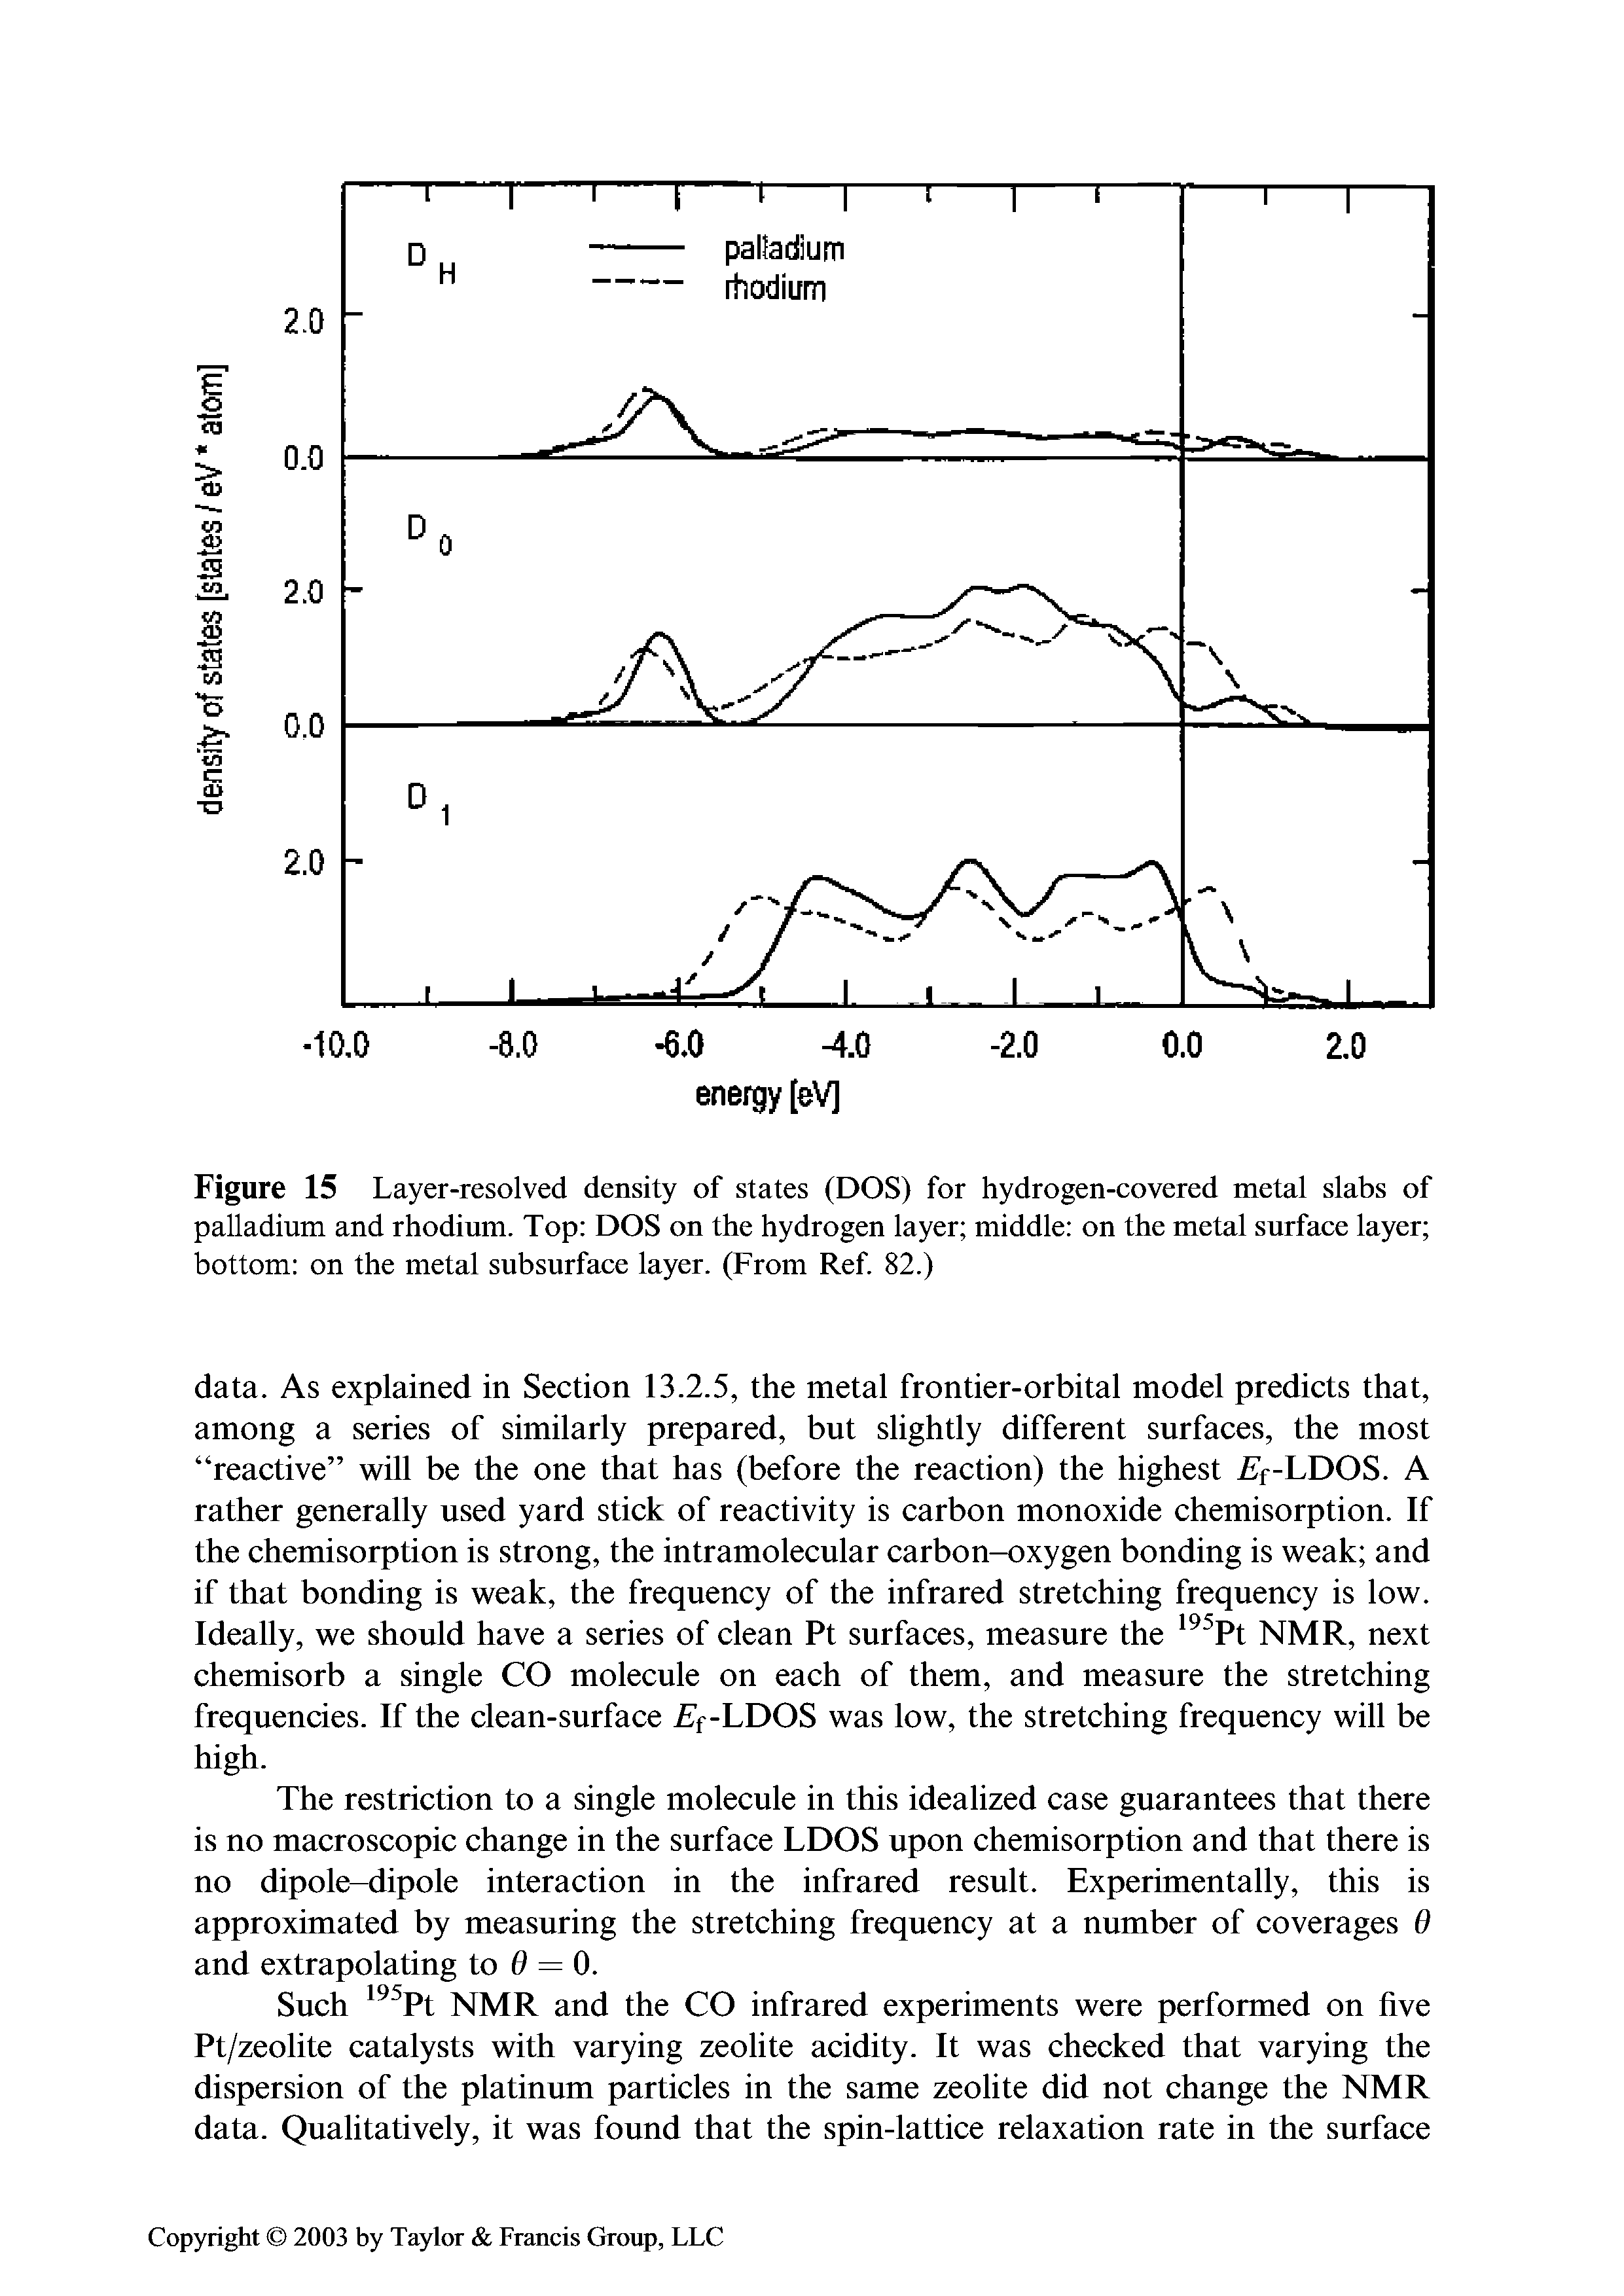 Figure 15 Layer-resolved density of states (DOS) for hydrogen-covered metal slabs of palladium and rhodium. Top DOS on the hydrogen layer middle on the metal surface layer bottom on the metal subsurface layer. (From Ref. 82.)...